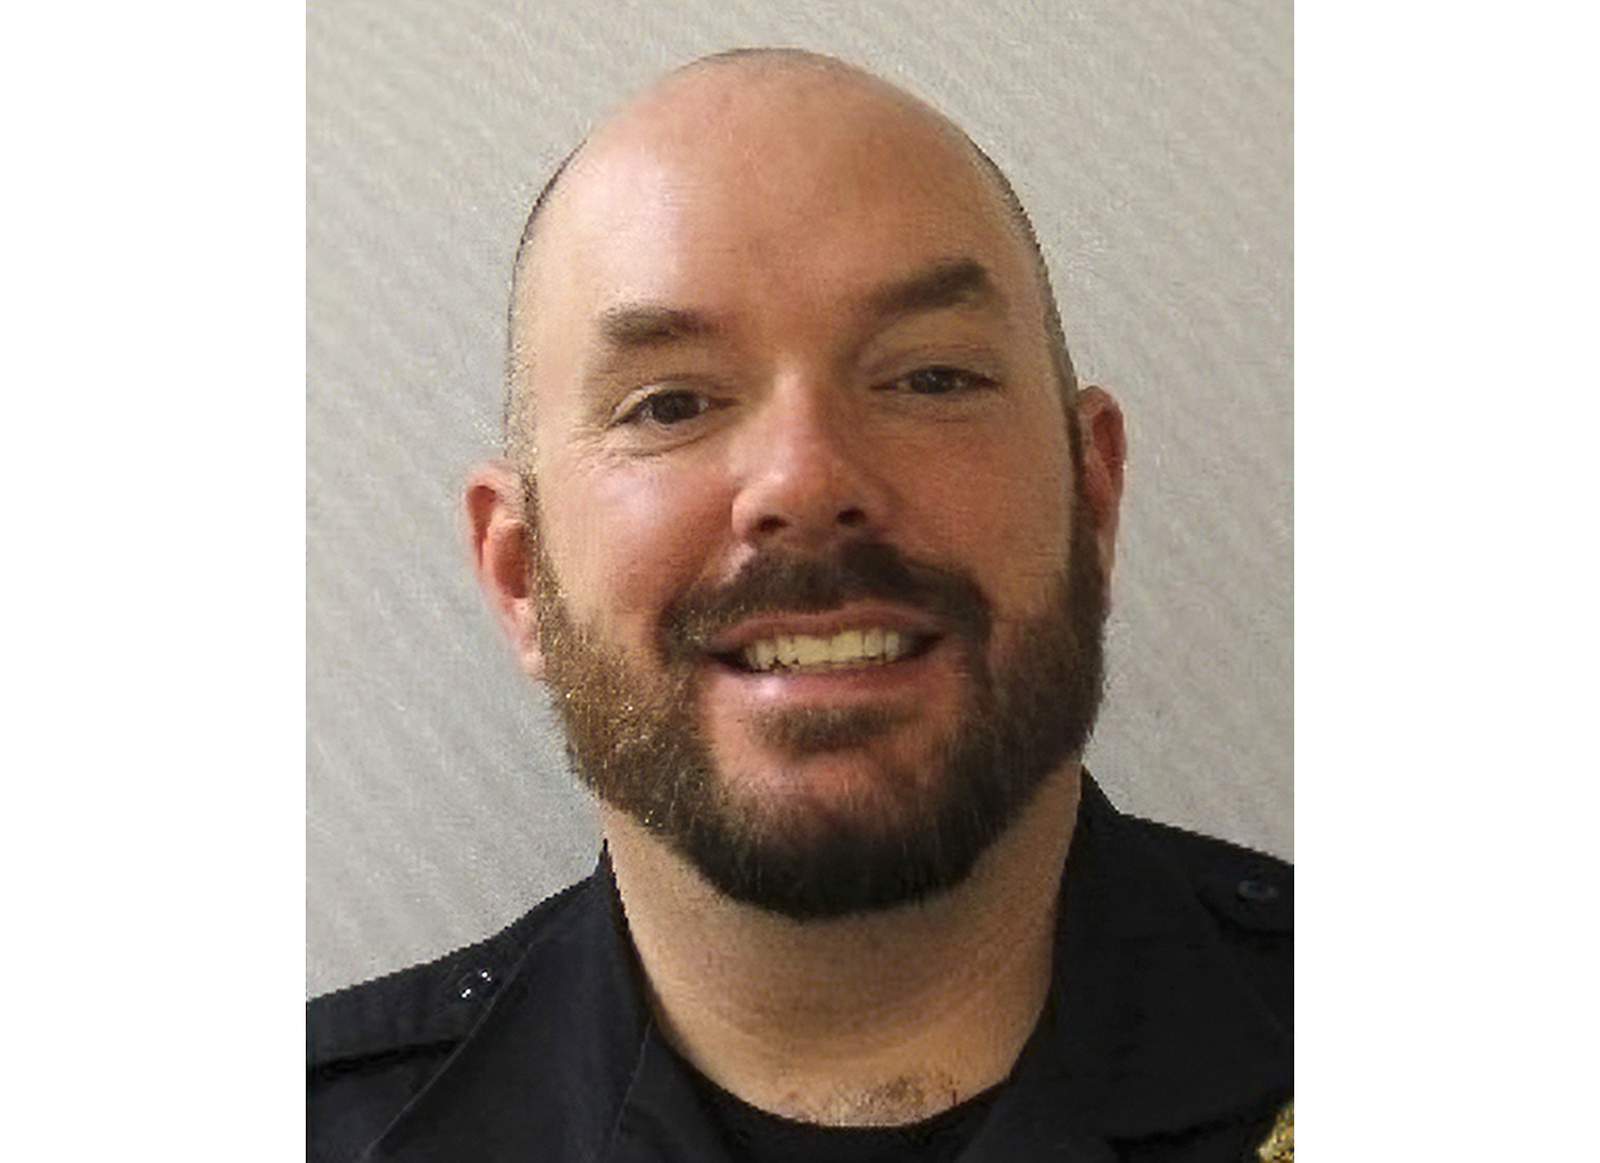 Officer killed in attack outside Capitol an 18-year veteran